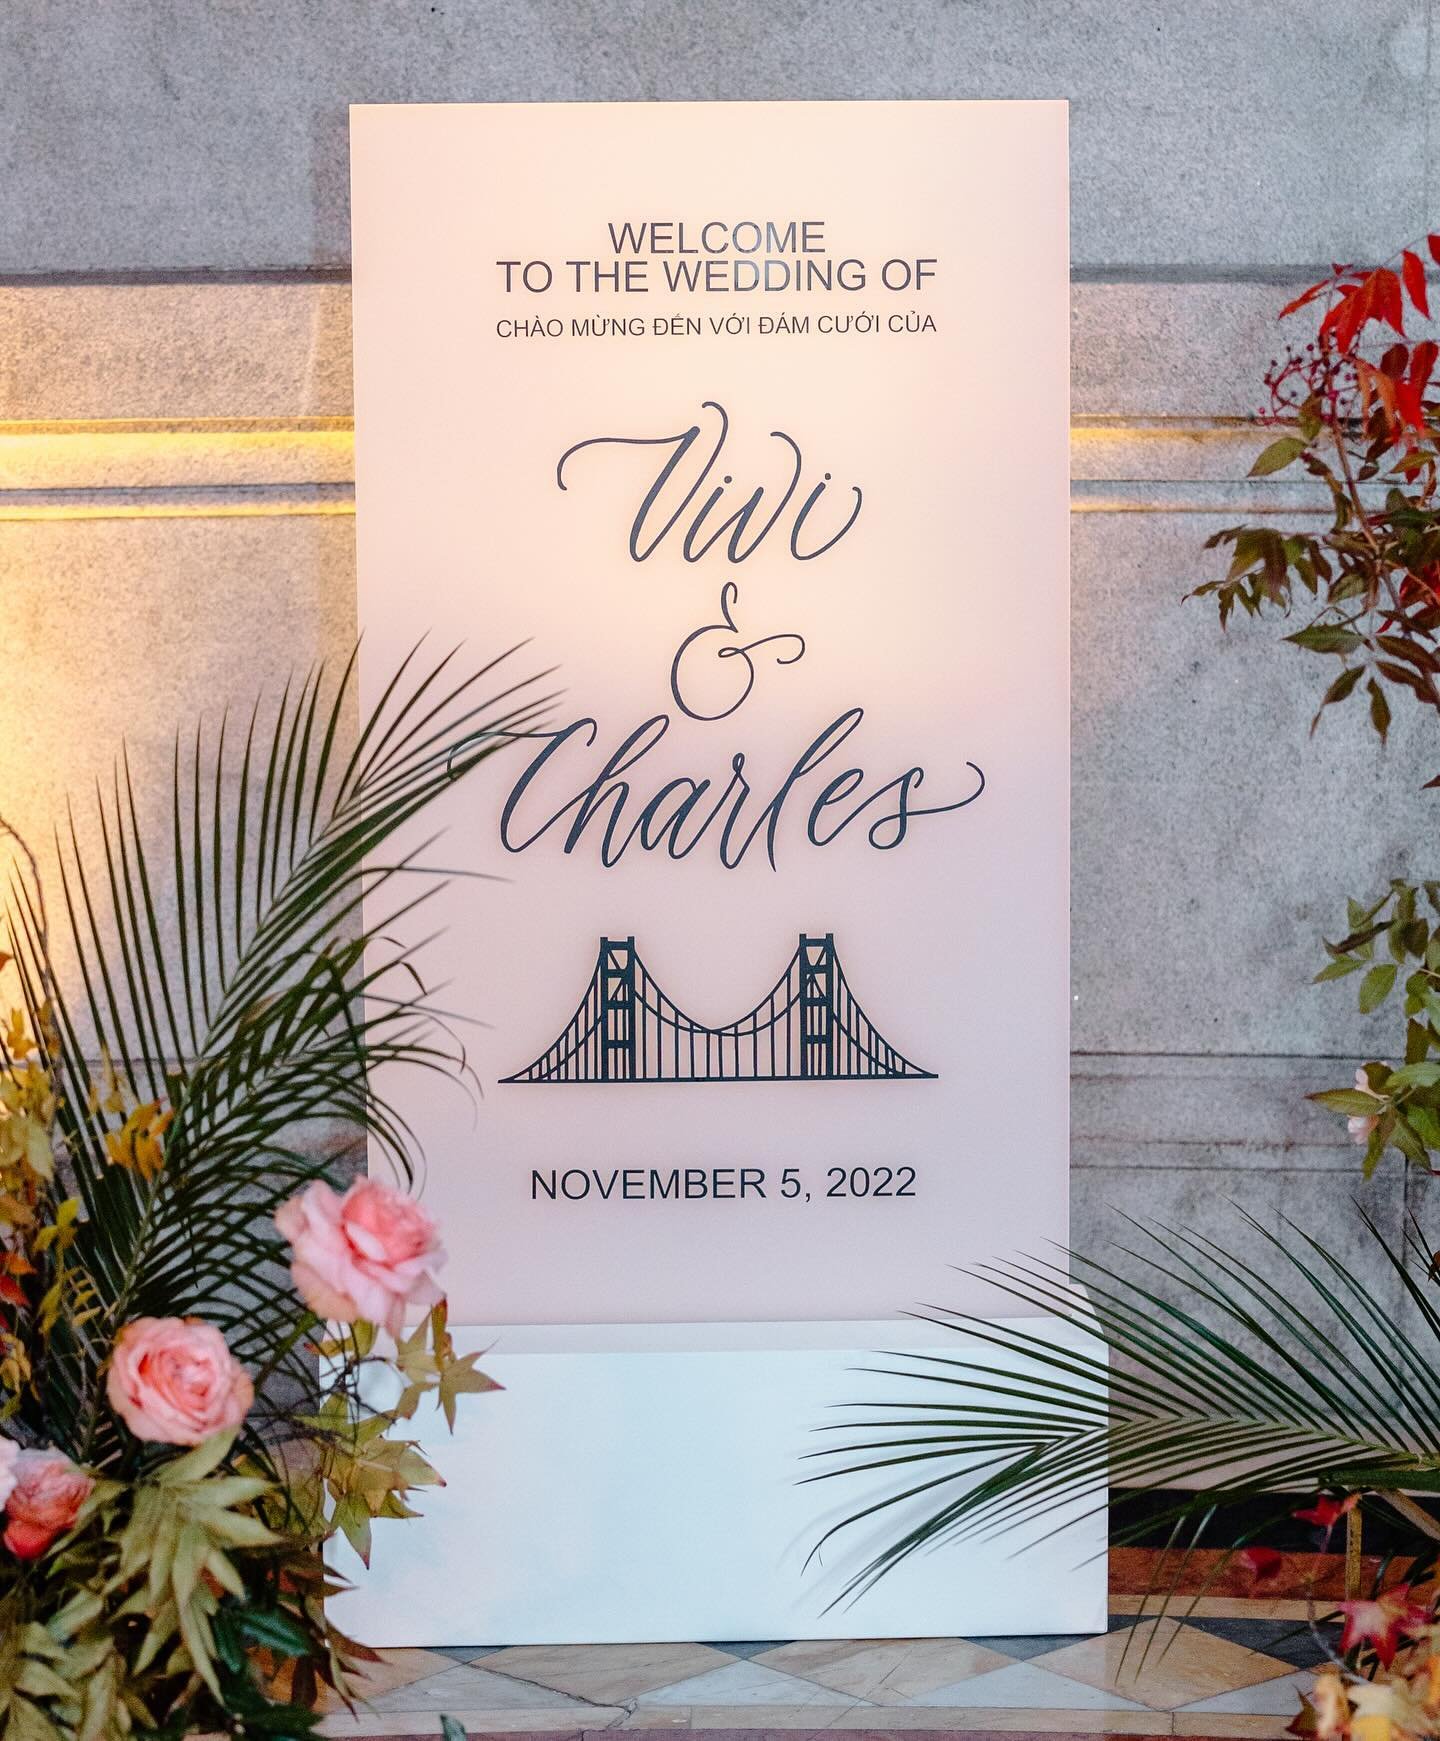 This gorgeous wedding being published on @theknot is just one more reason to share it again! Click the link in my story to read about Vivi and Charlie and all the unique touches they brought to celebrate their union as a queer interracial couple!

Pl